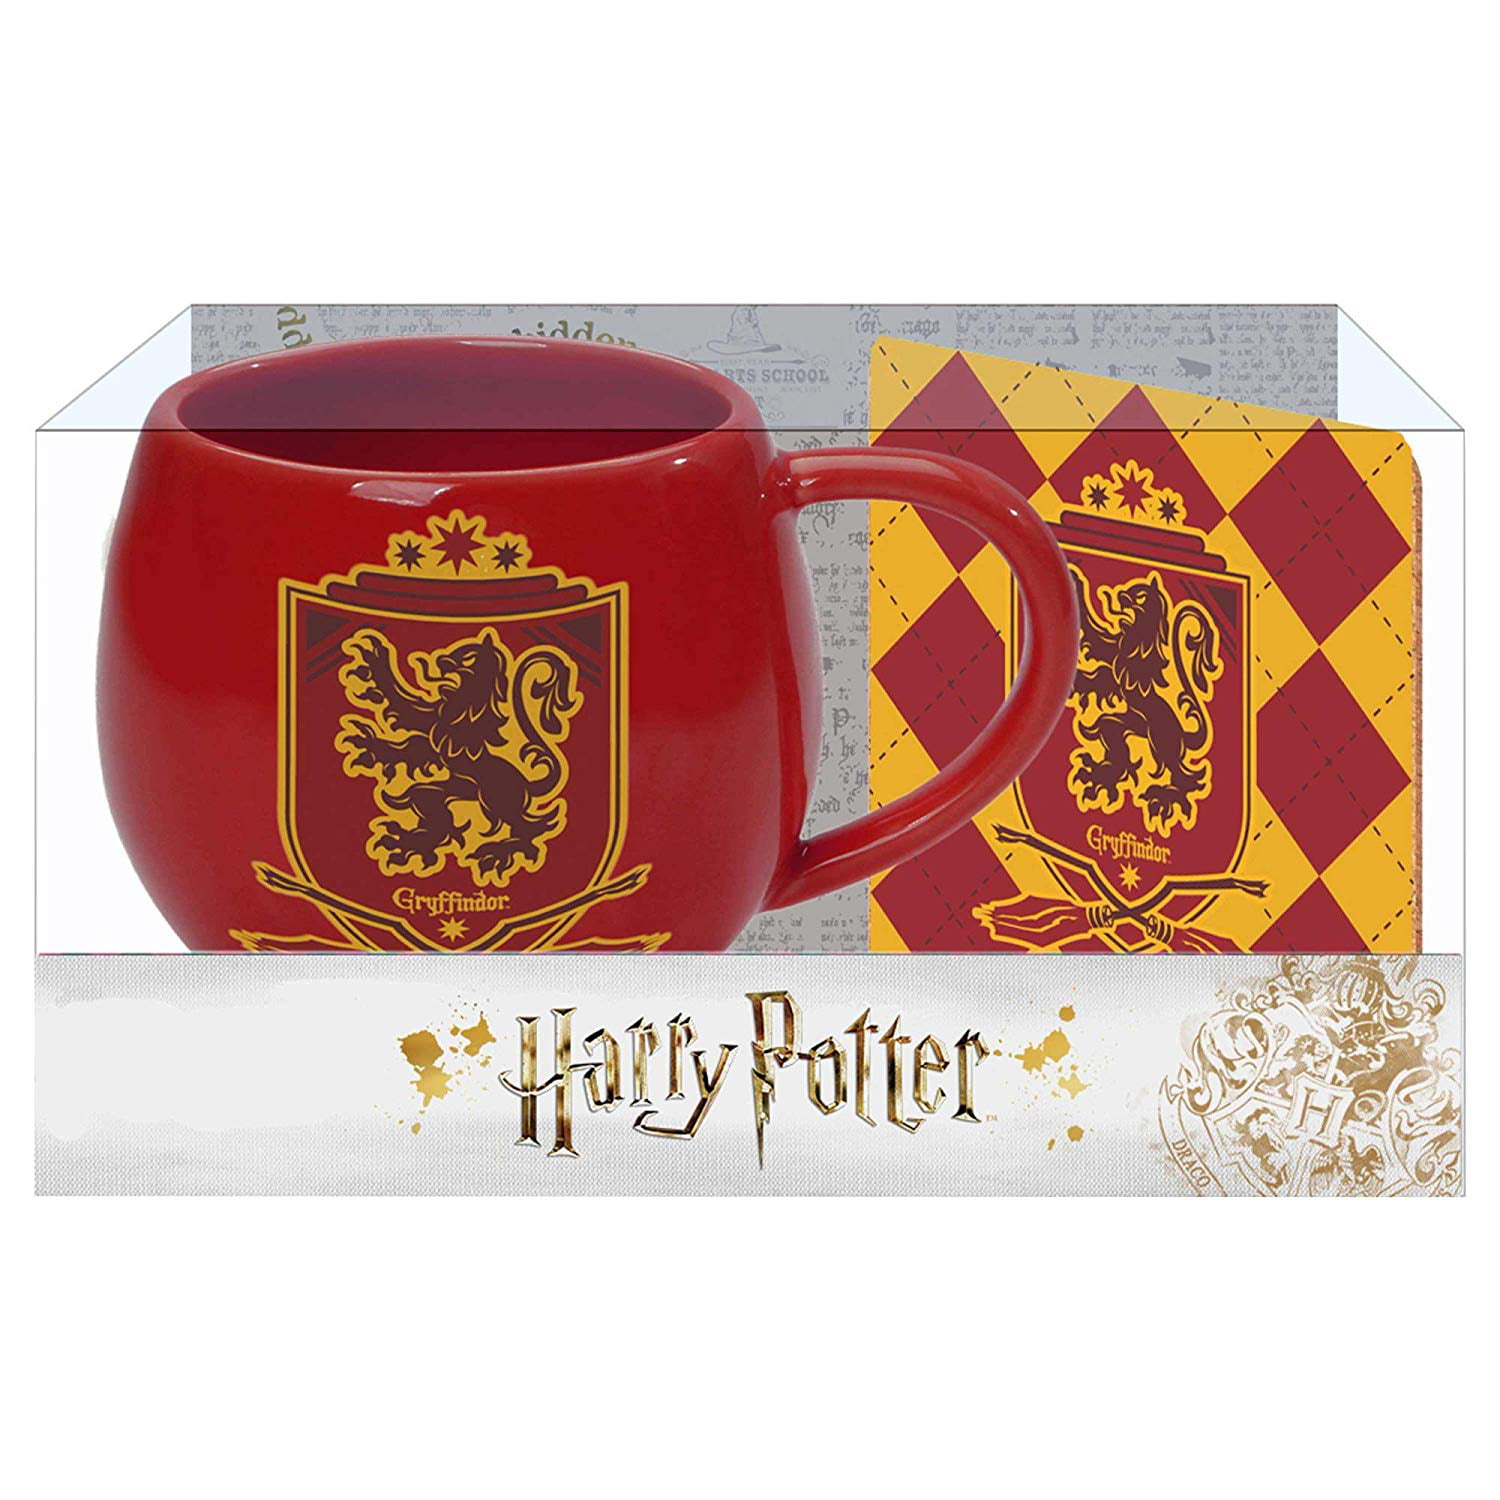 OFFICIAL HARRY POTTER GRYFFINDOR CREST CERAMIC BREAKFAST BOWL NEW & BOXED 